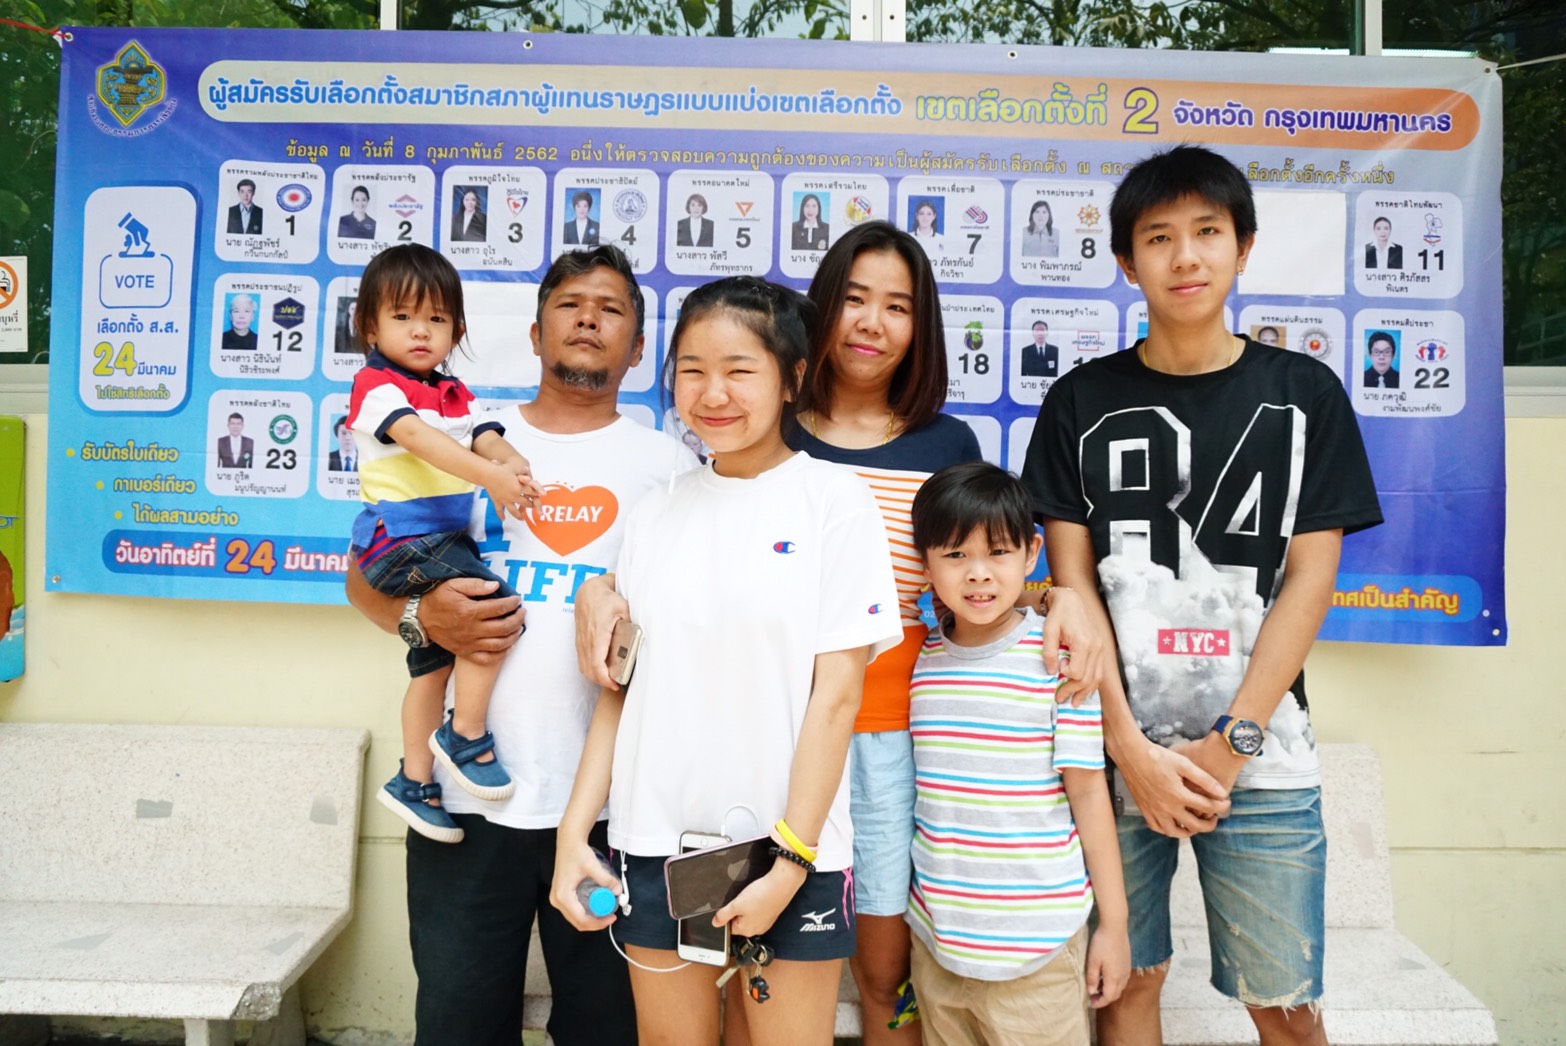 The Phattamapornpong family came out to vote together Sunday at a polling station near the CentralWorld shopping mall.